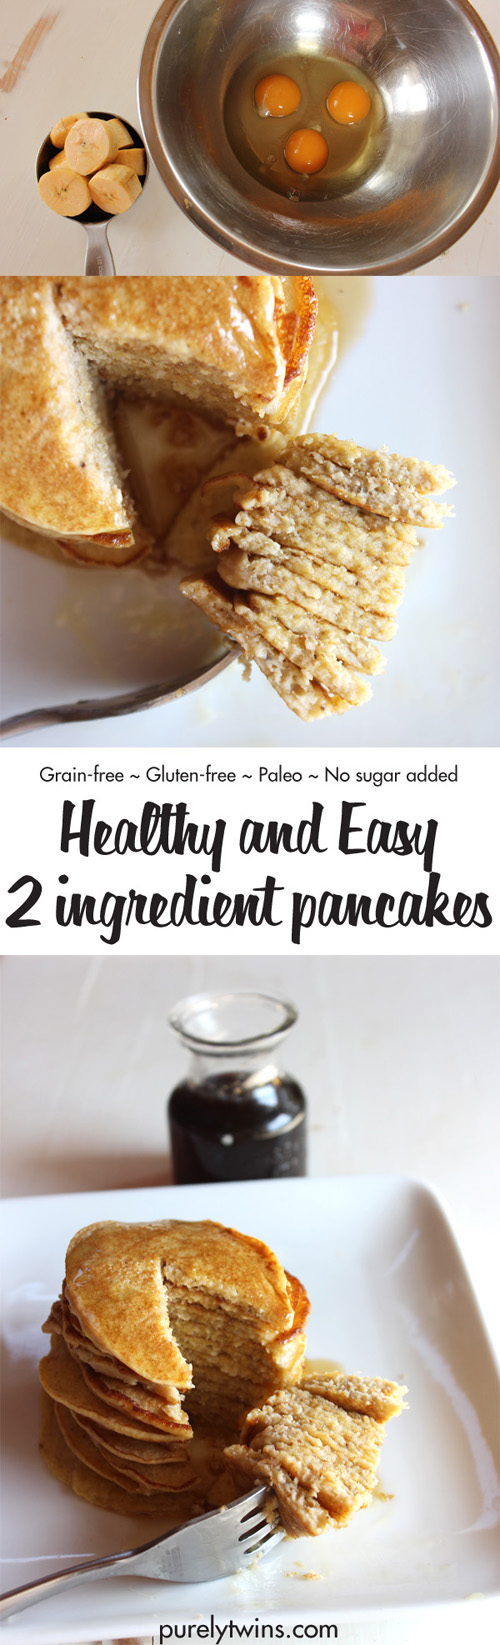 How to make fluffy pancakes at home, with ease. This easy gluten-free grain-free pancake recipe only requires 2 simple ingredients: eggs and plantains. Soft and pillowy. A stack of deliciousness. Skip the store-bought pancake mix. These healthy 2 ingredient pancakes are incredible. 